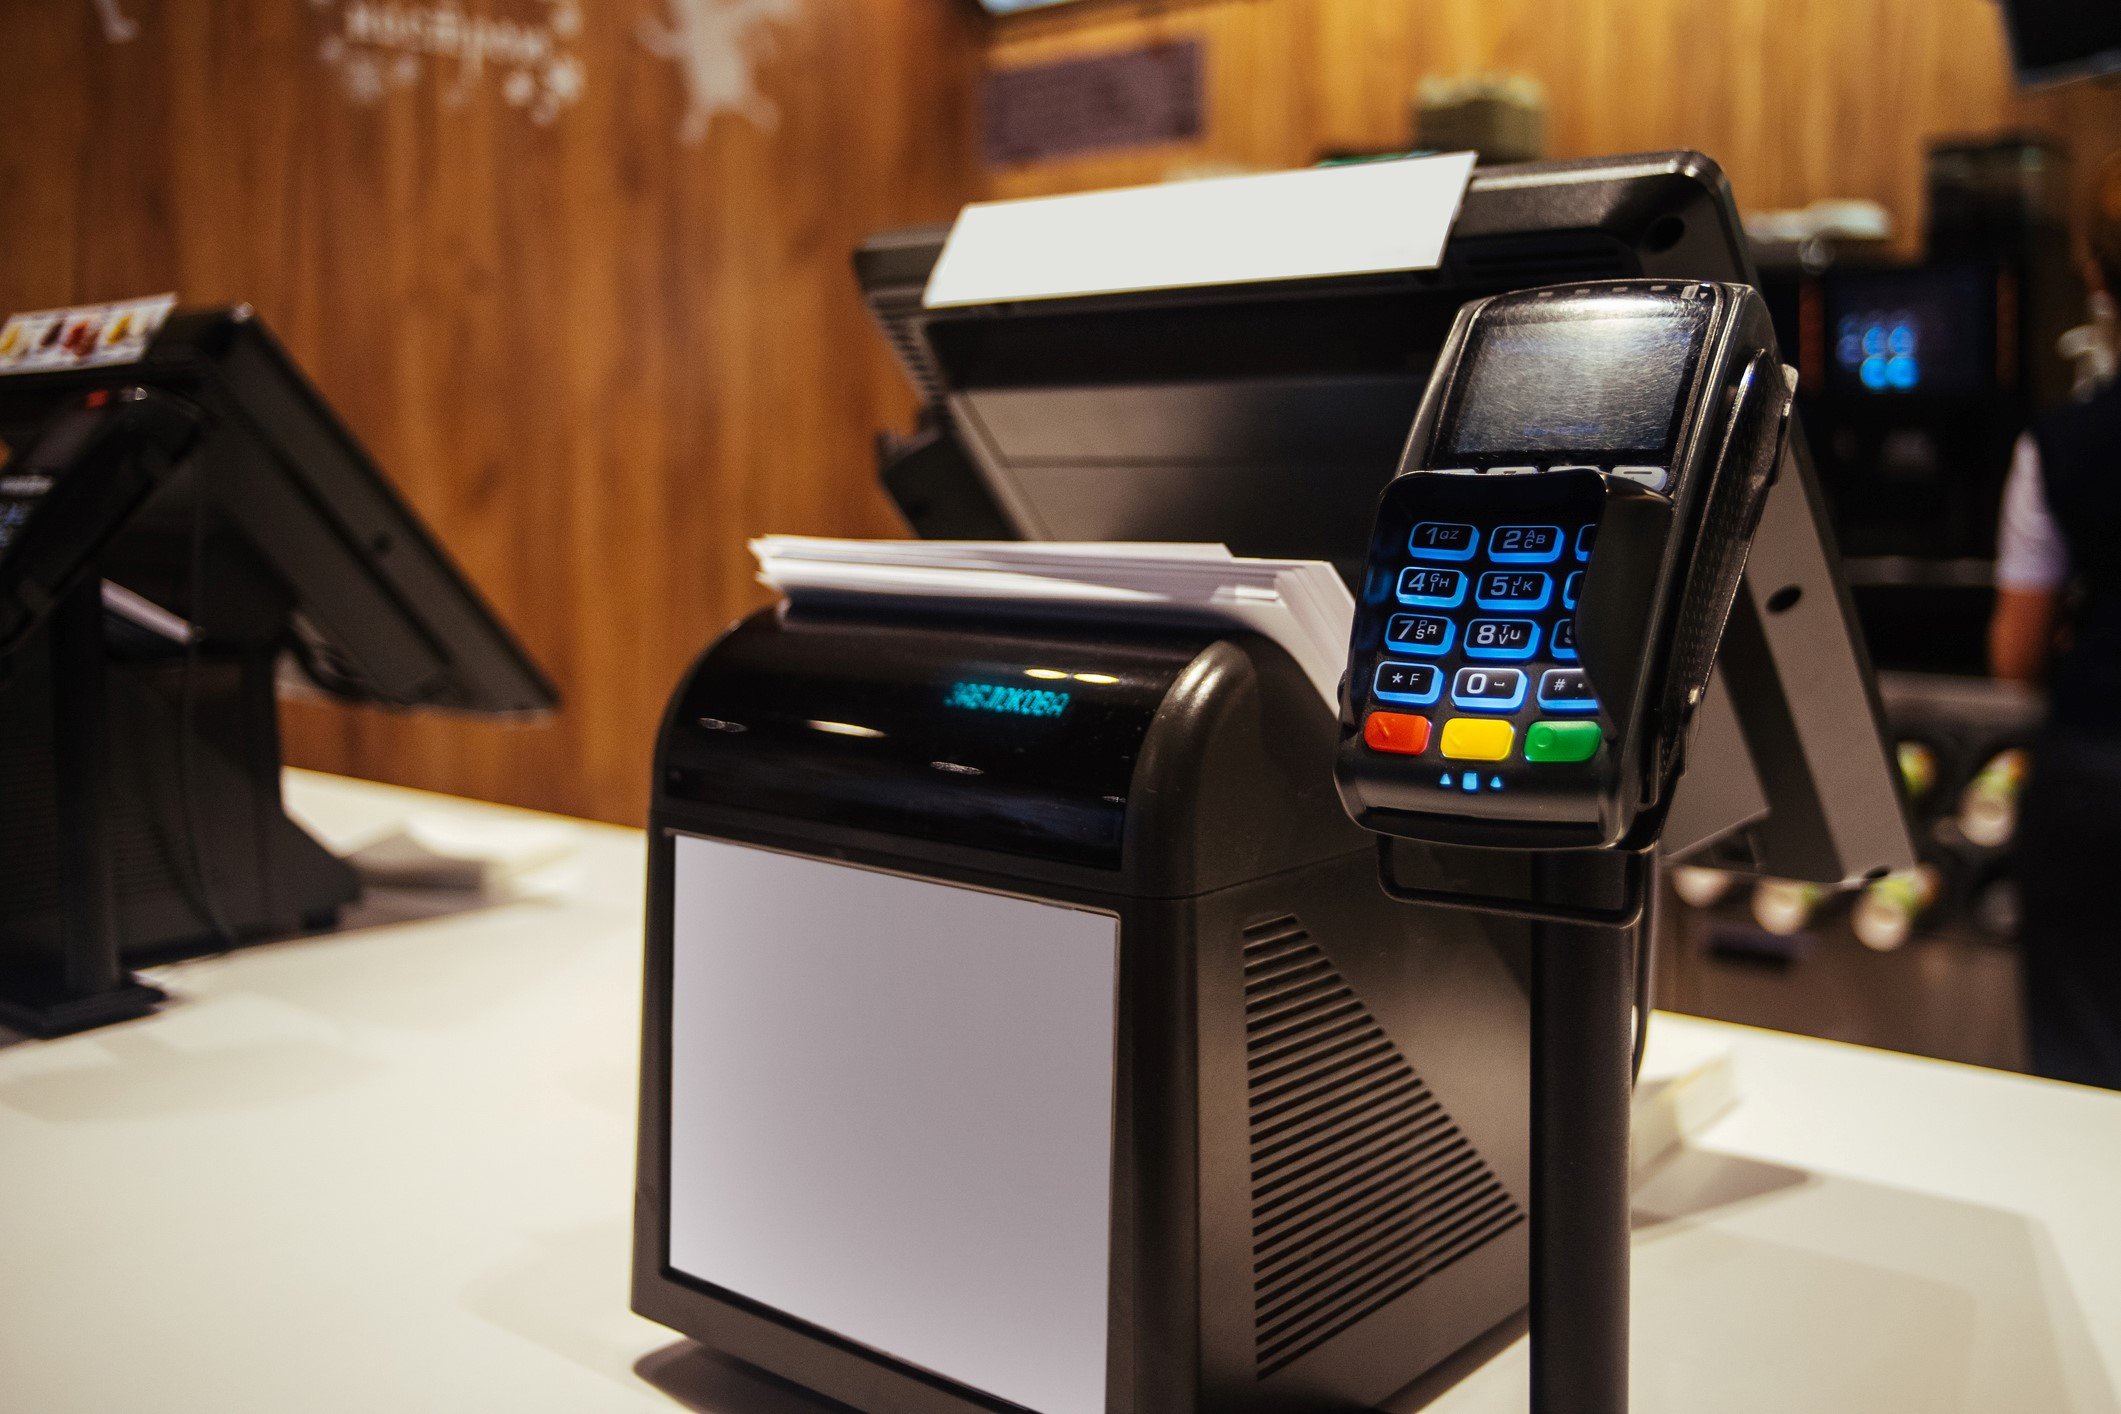 POS Payment Processing System